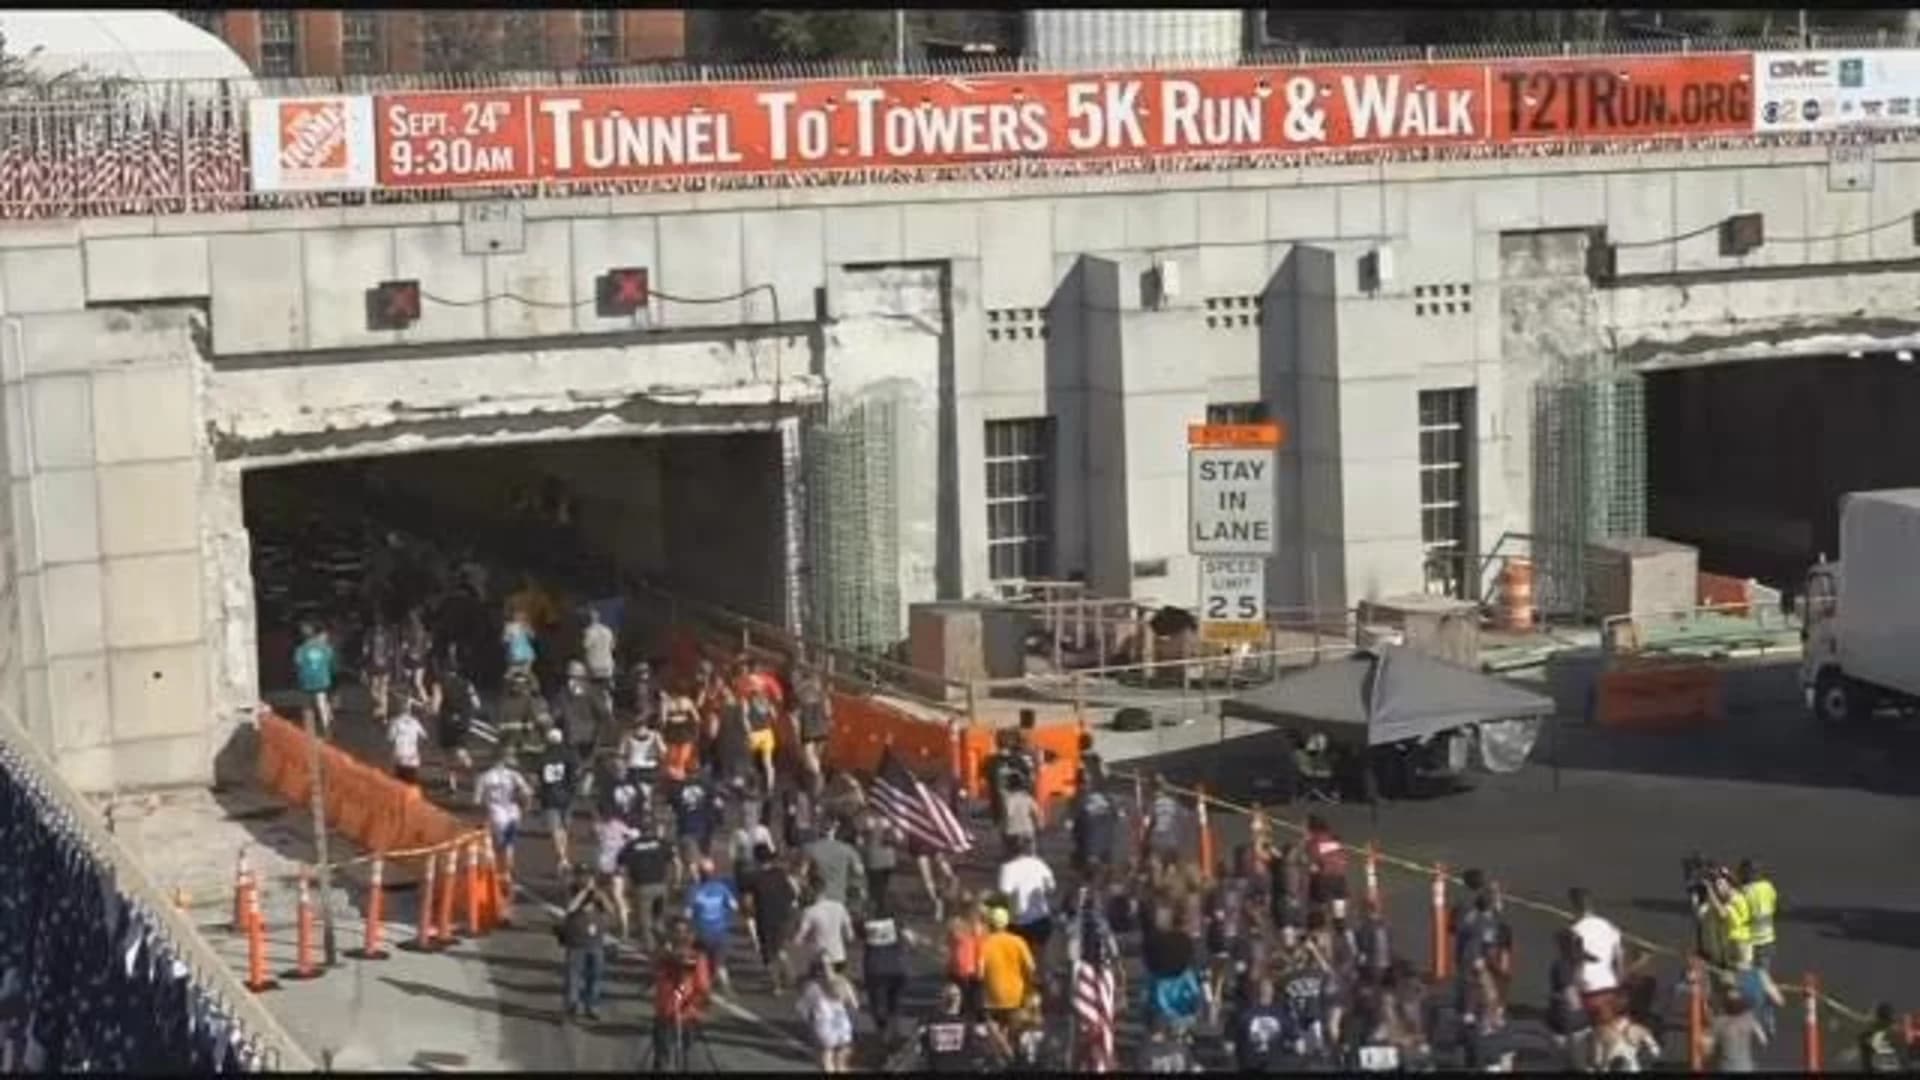 Runners take part in annual Tunnel to Towers charity 5K